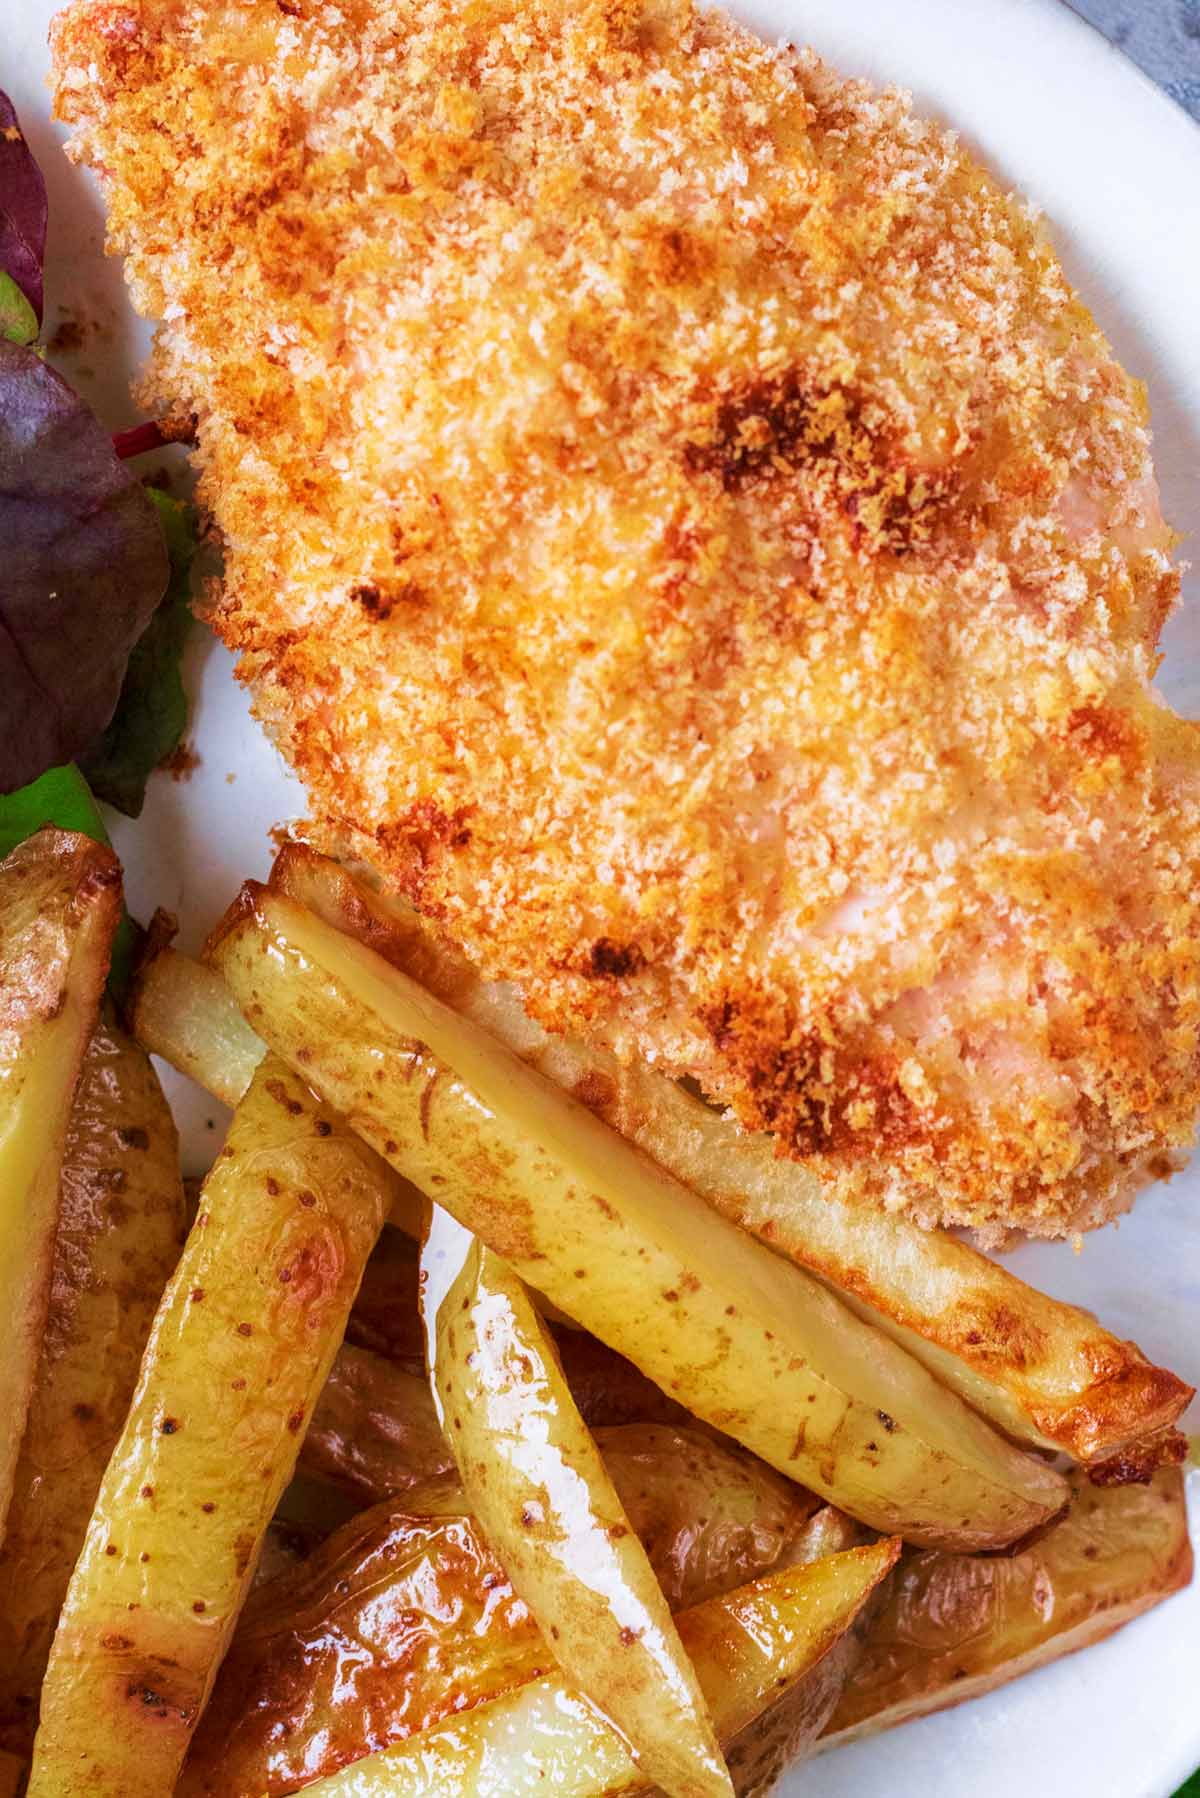 A baked chicken Kiev on a plate with some potato fries.